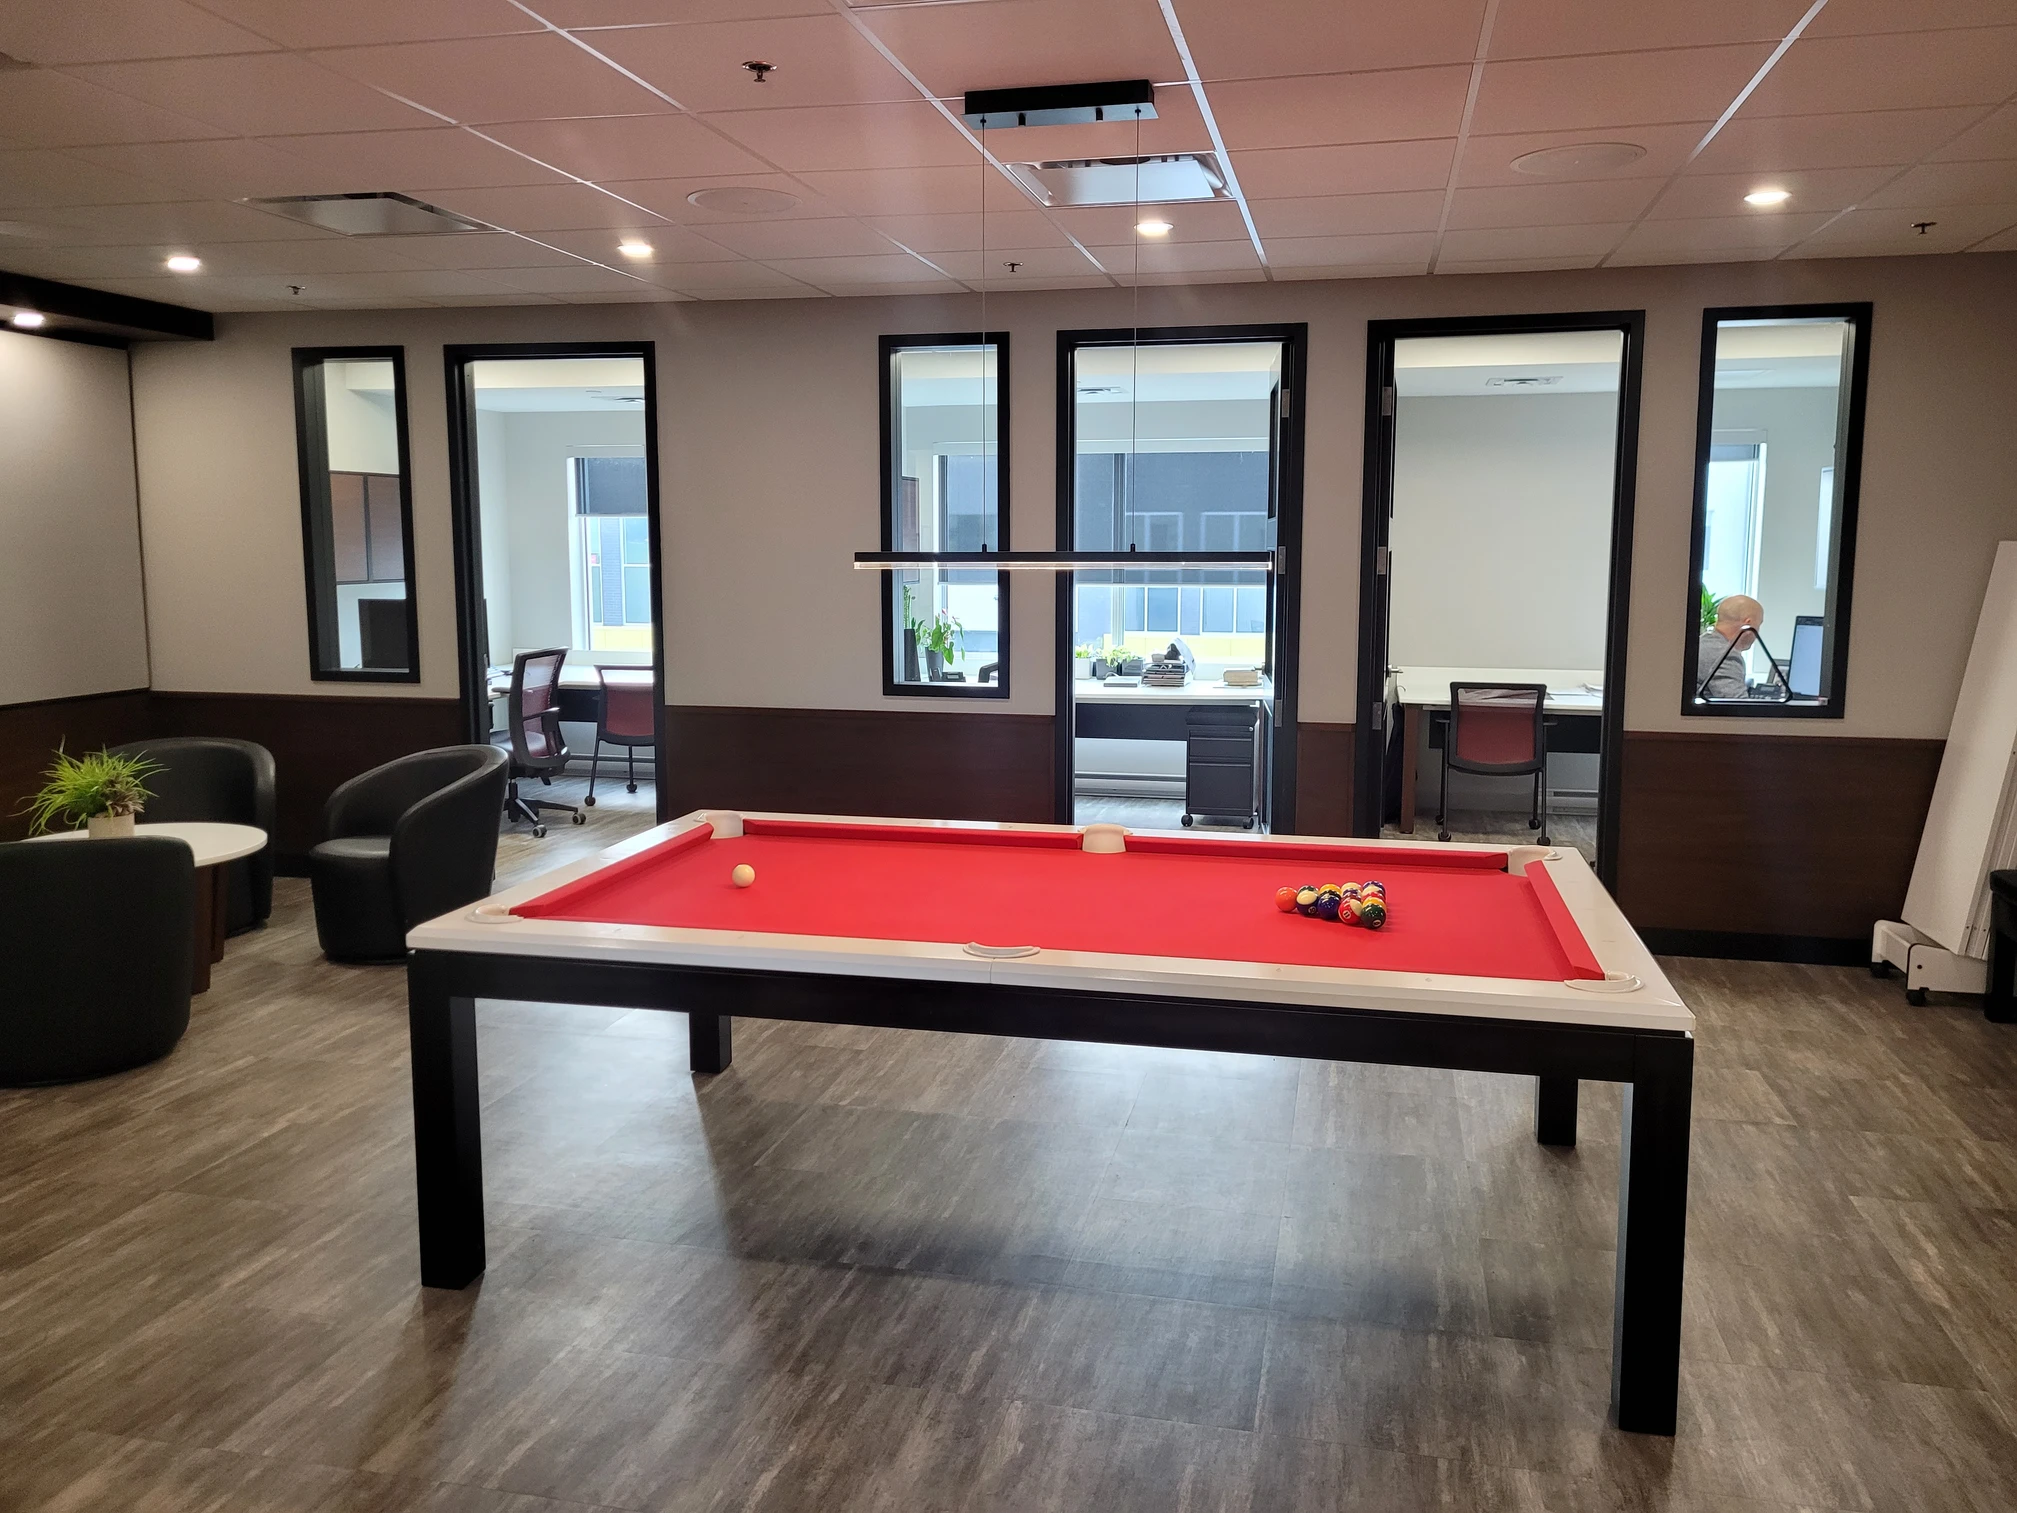 Protech Construction's head office with a pool table.